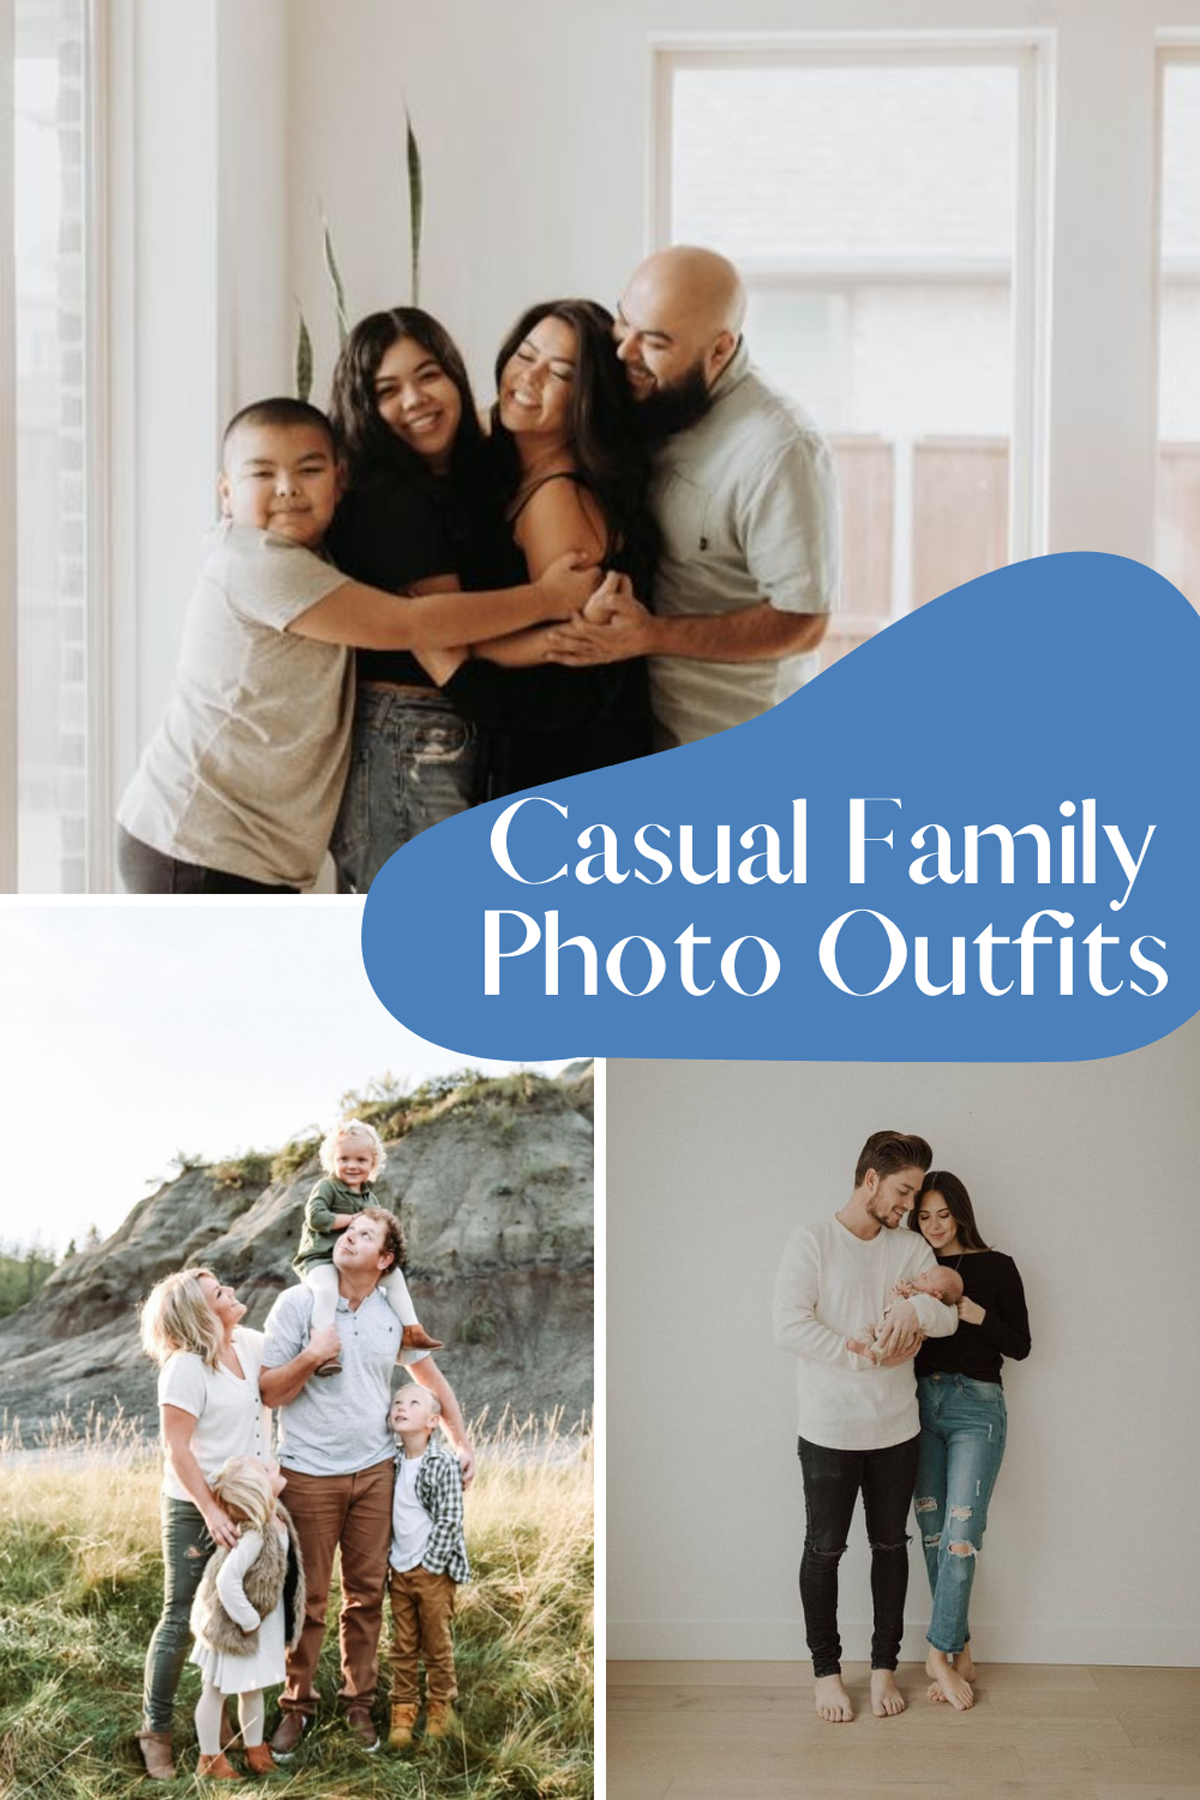 Casual Family Photo Outfits